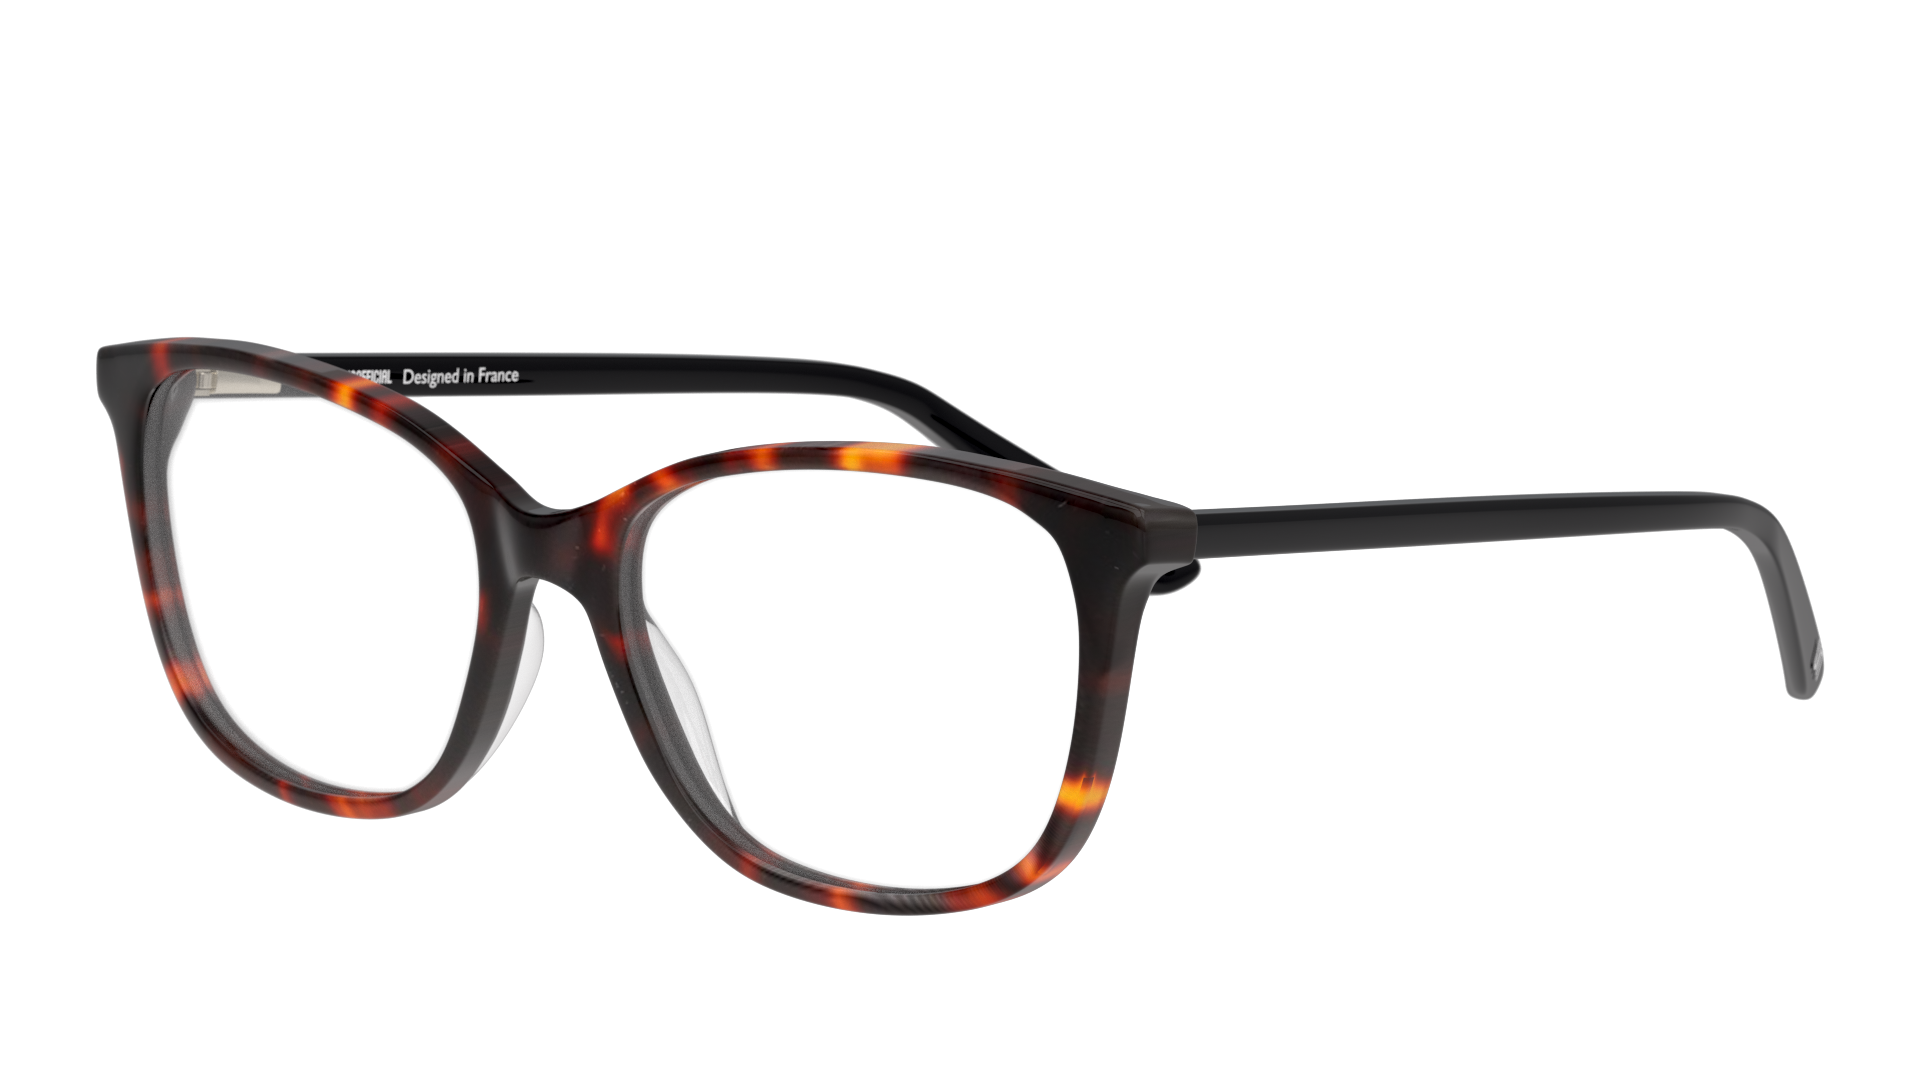 Angle_Left01 Unofficial UNOF0035 Glasses Transparent / Tortoise Shell